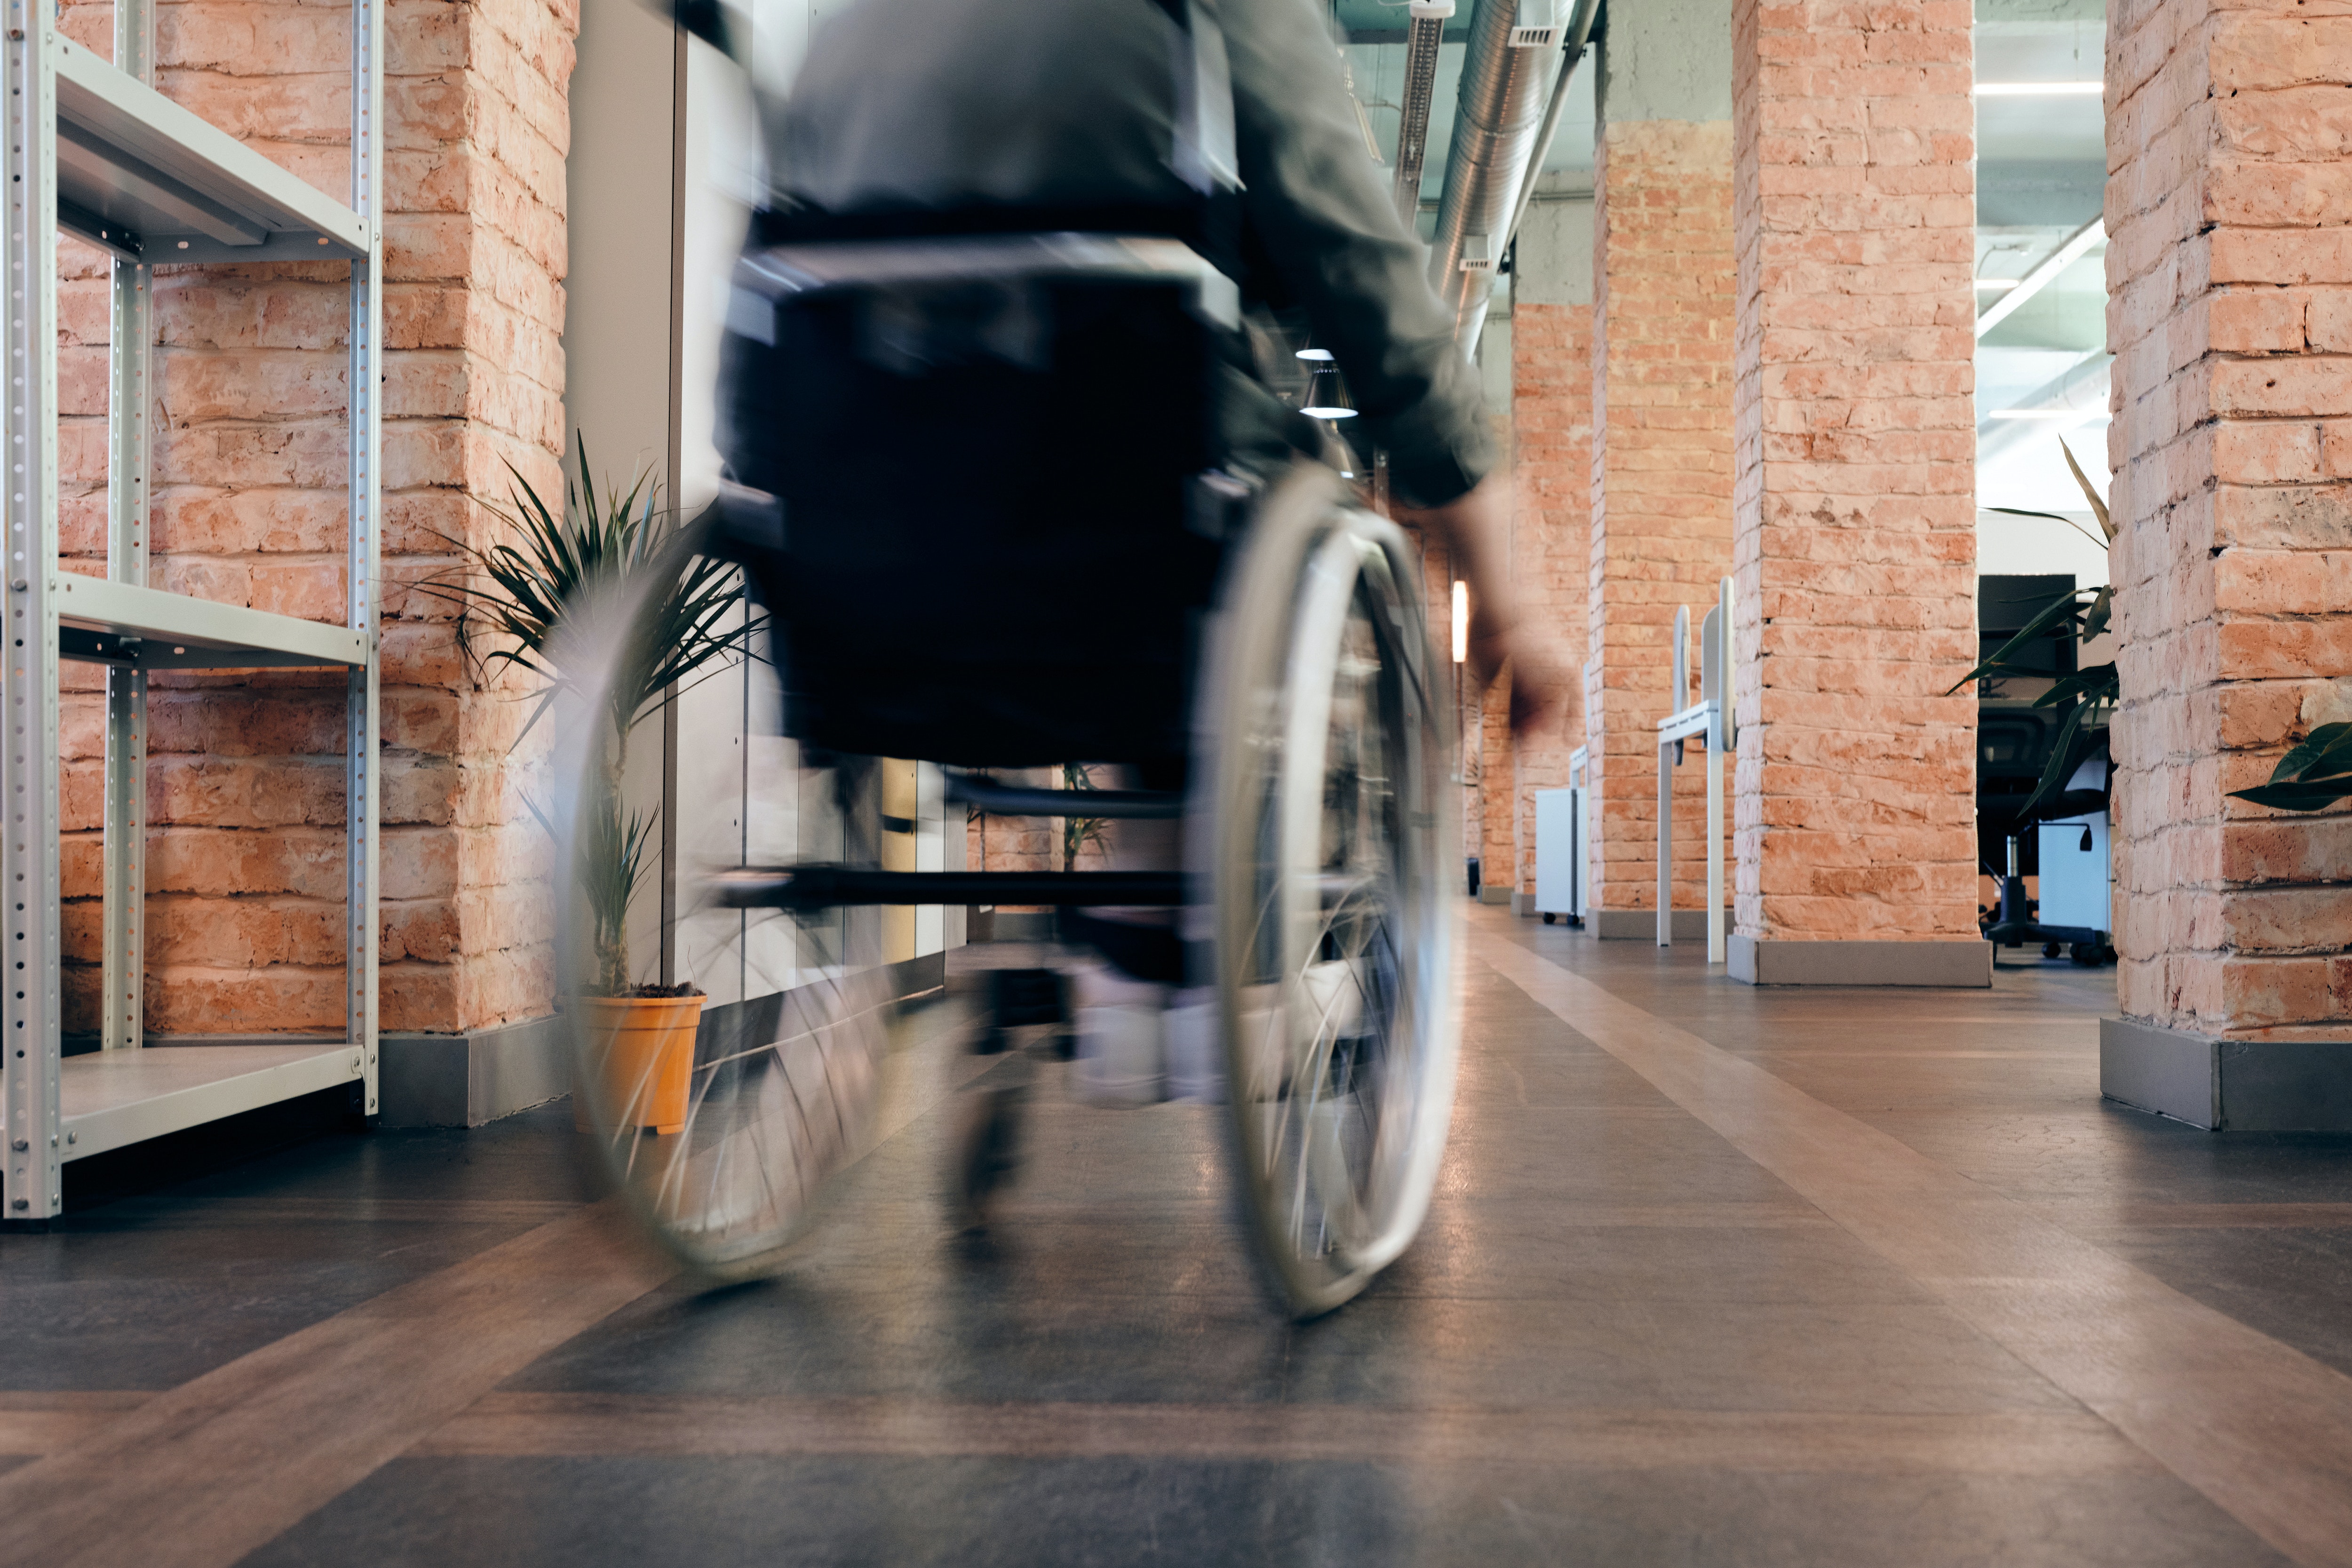 Image shows a man in a wheelchair moving around what appears to be an office. The image is slightly out of focus implying movement